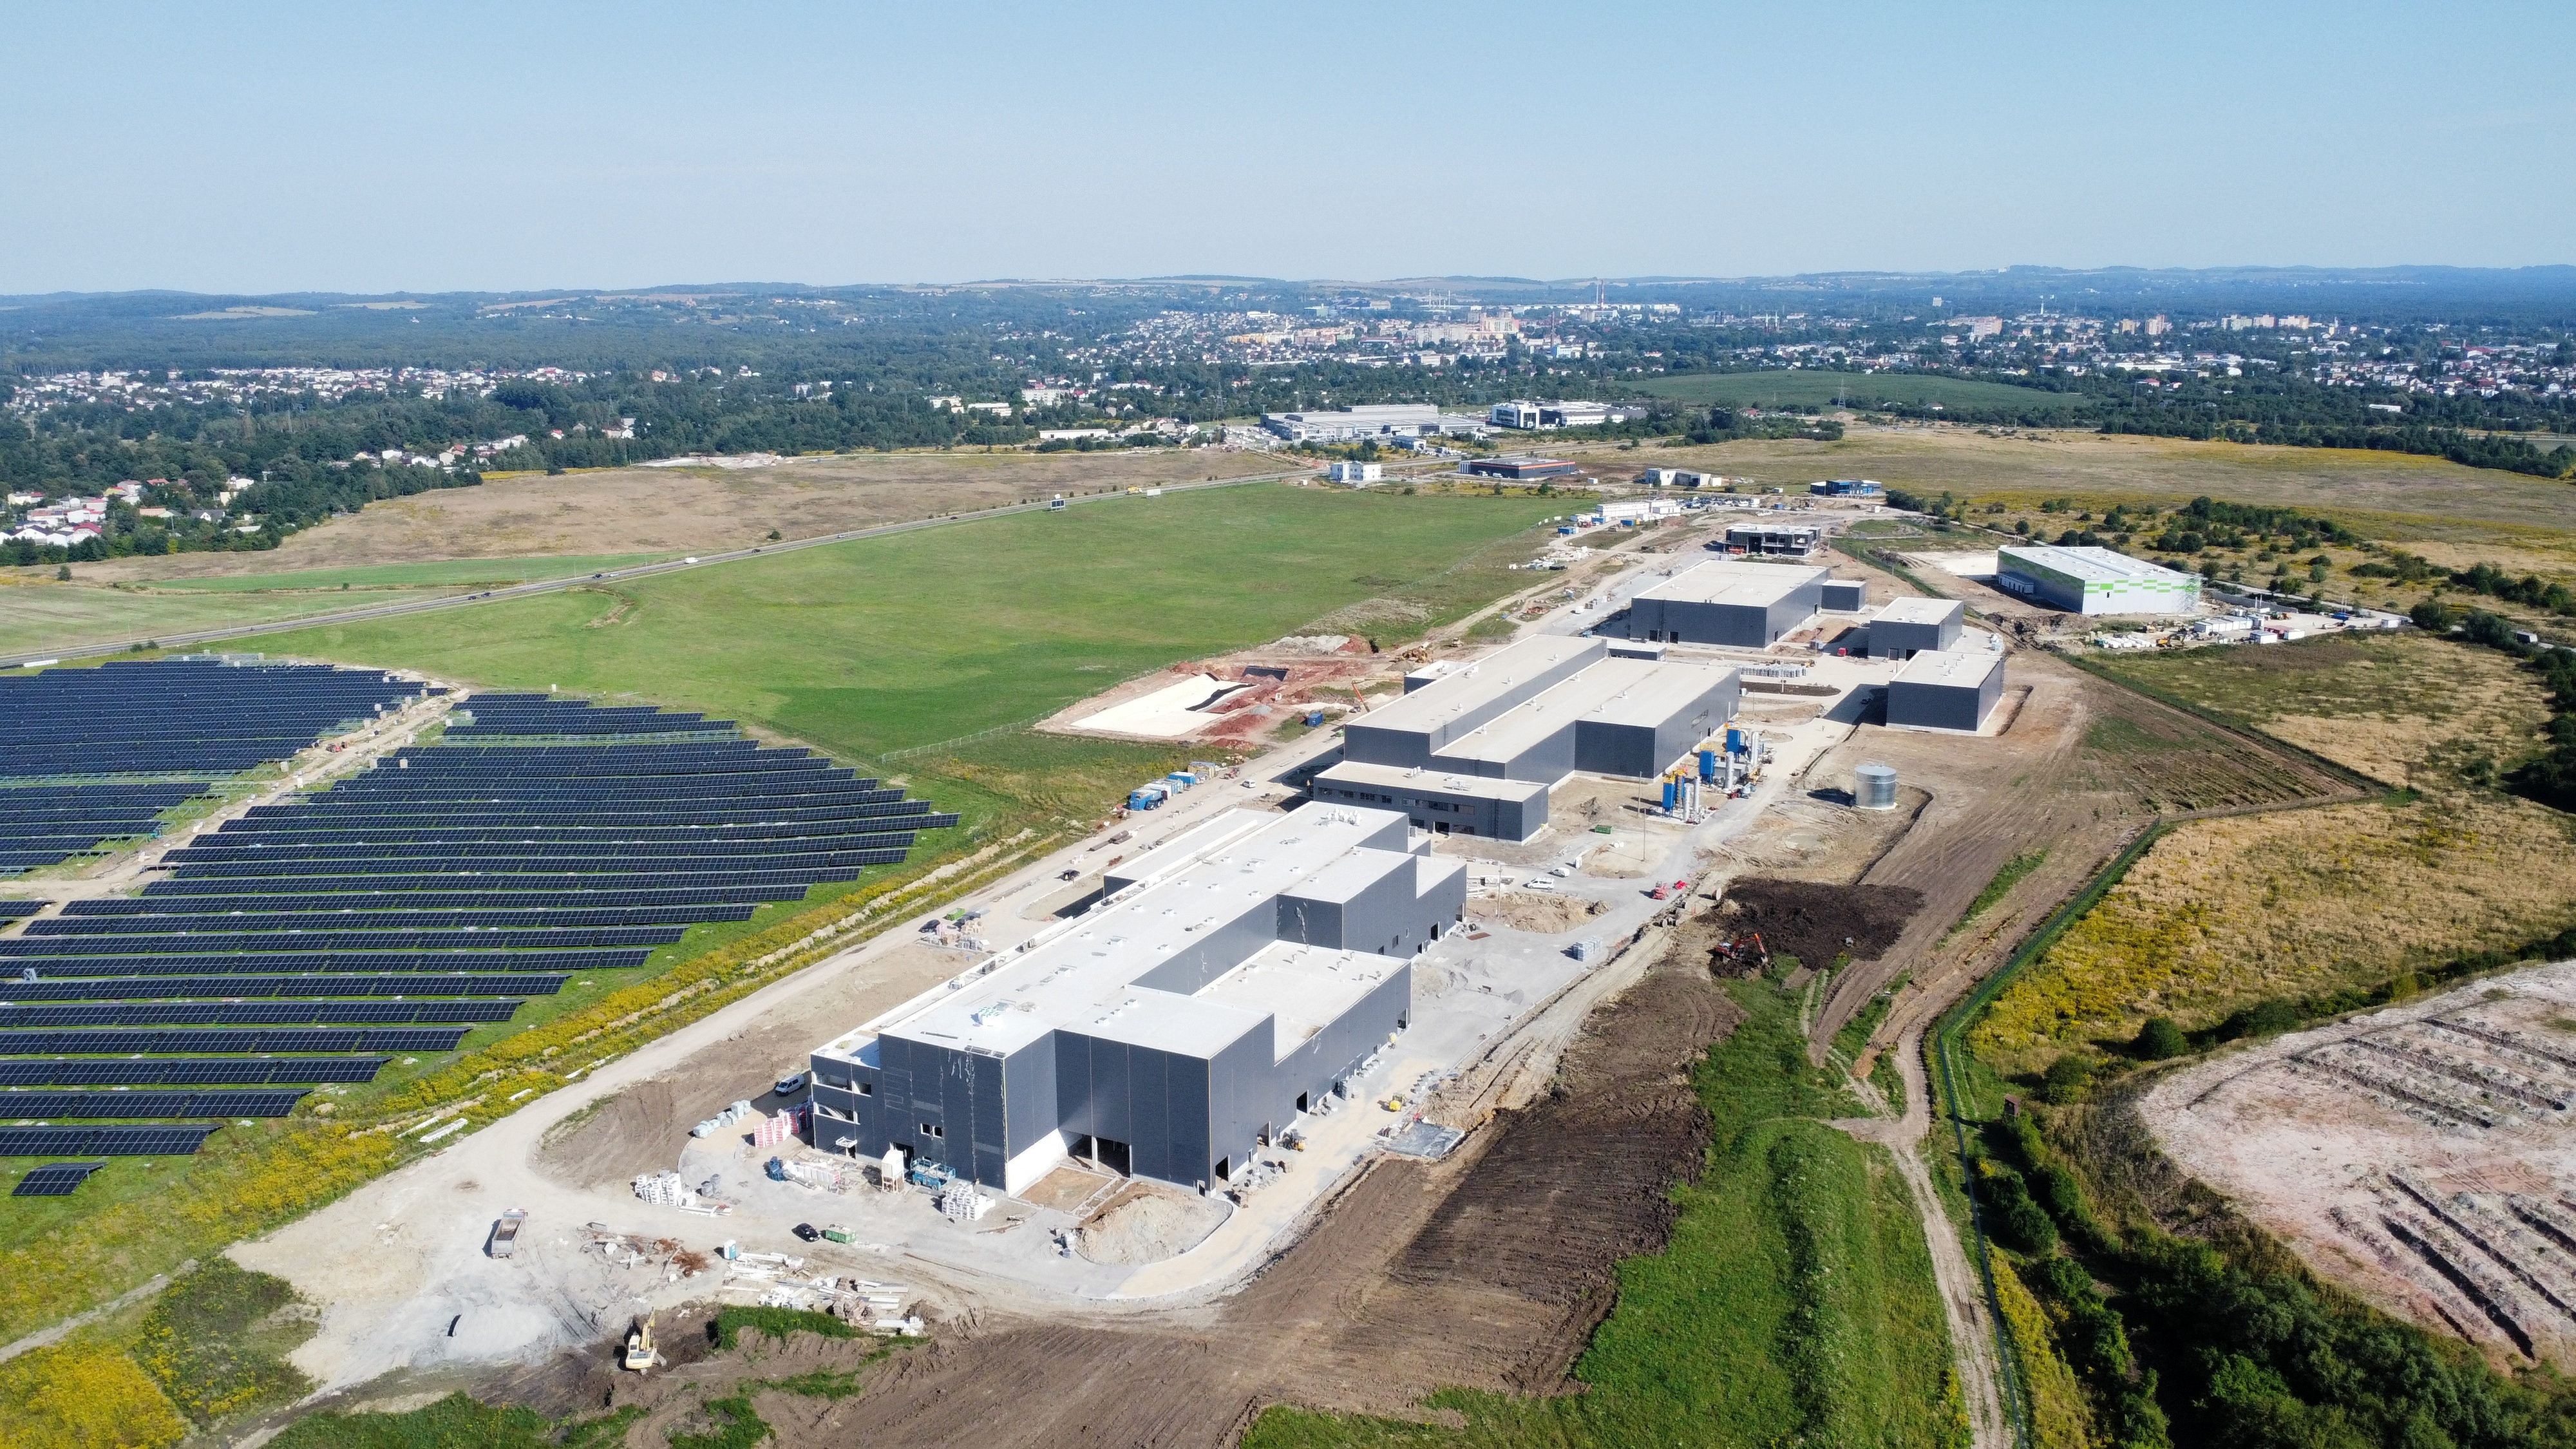 AE Elemental's electric vehicle battery recycling plant in Zawiercie